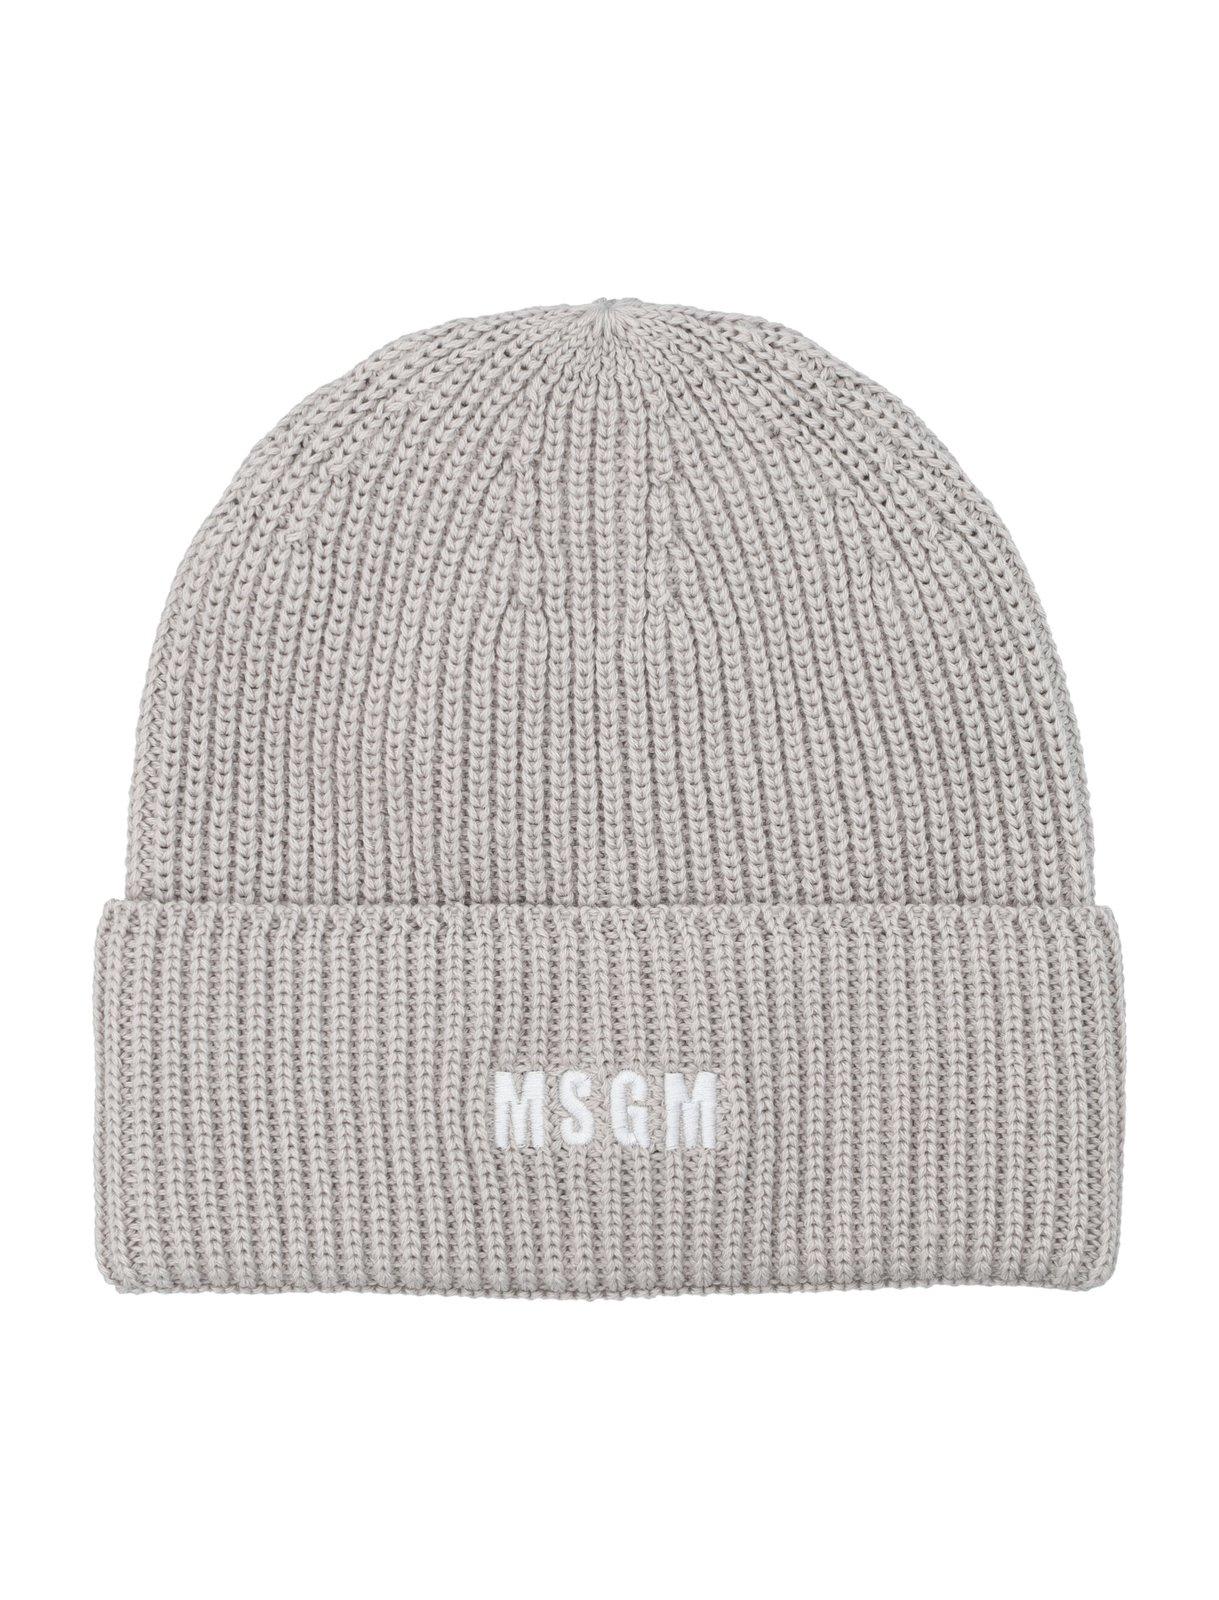 MSGM LOGO EMBROIDERED KNITTED BEANIE